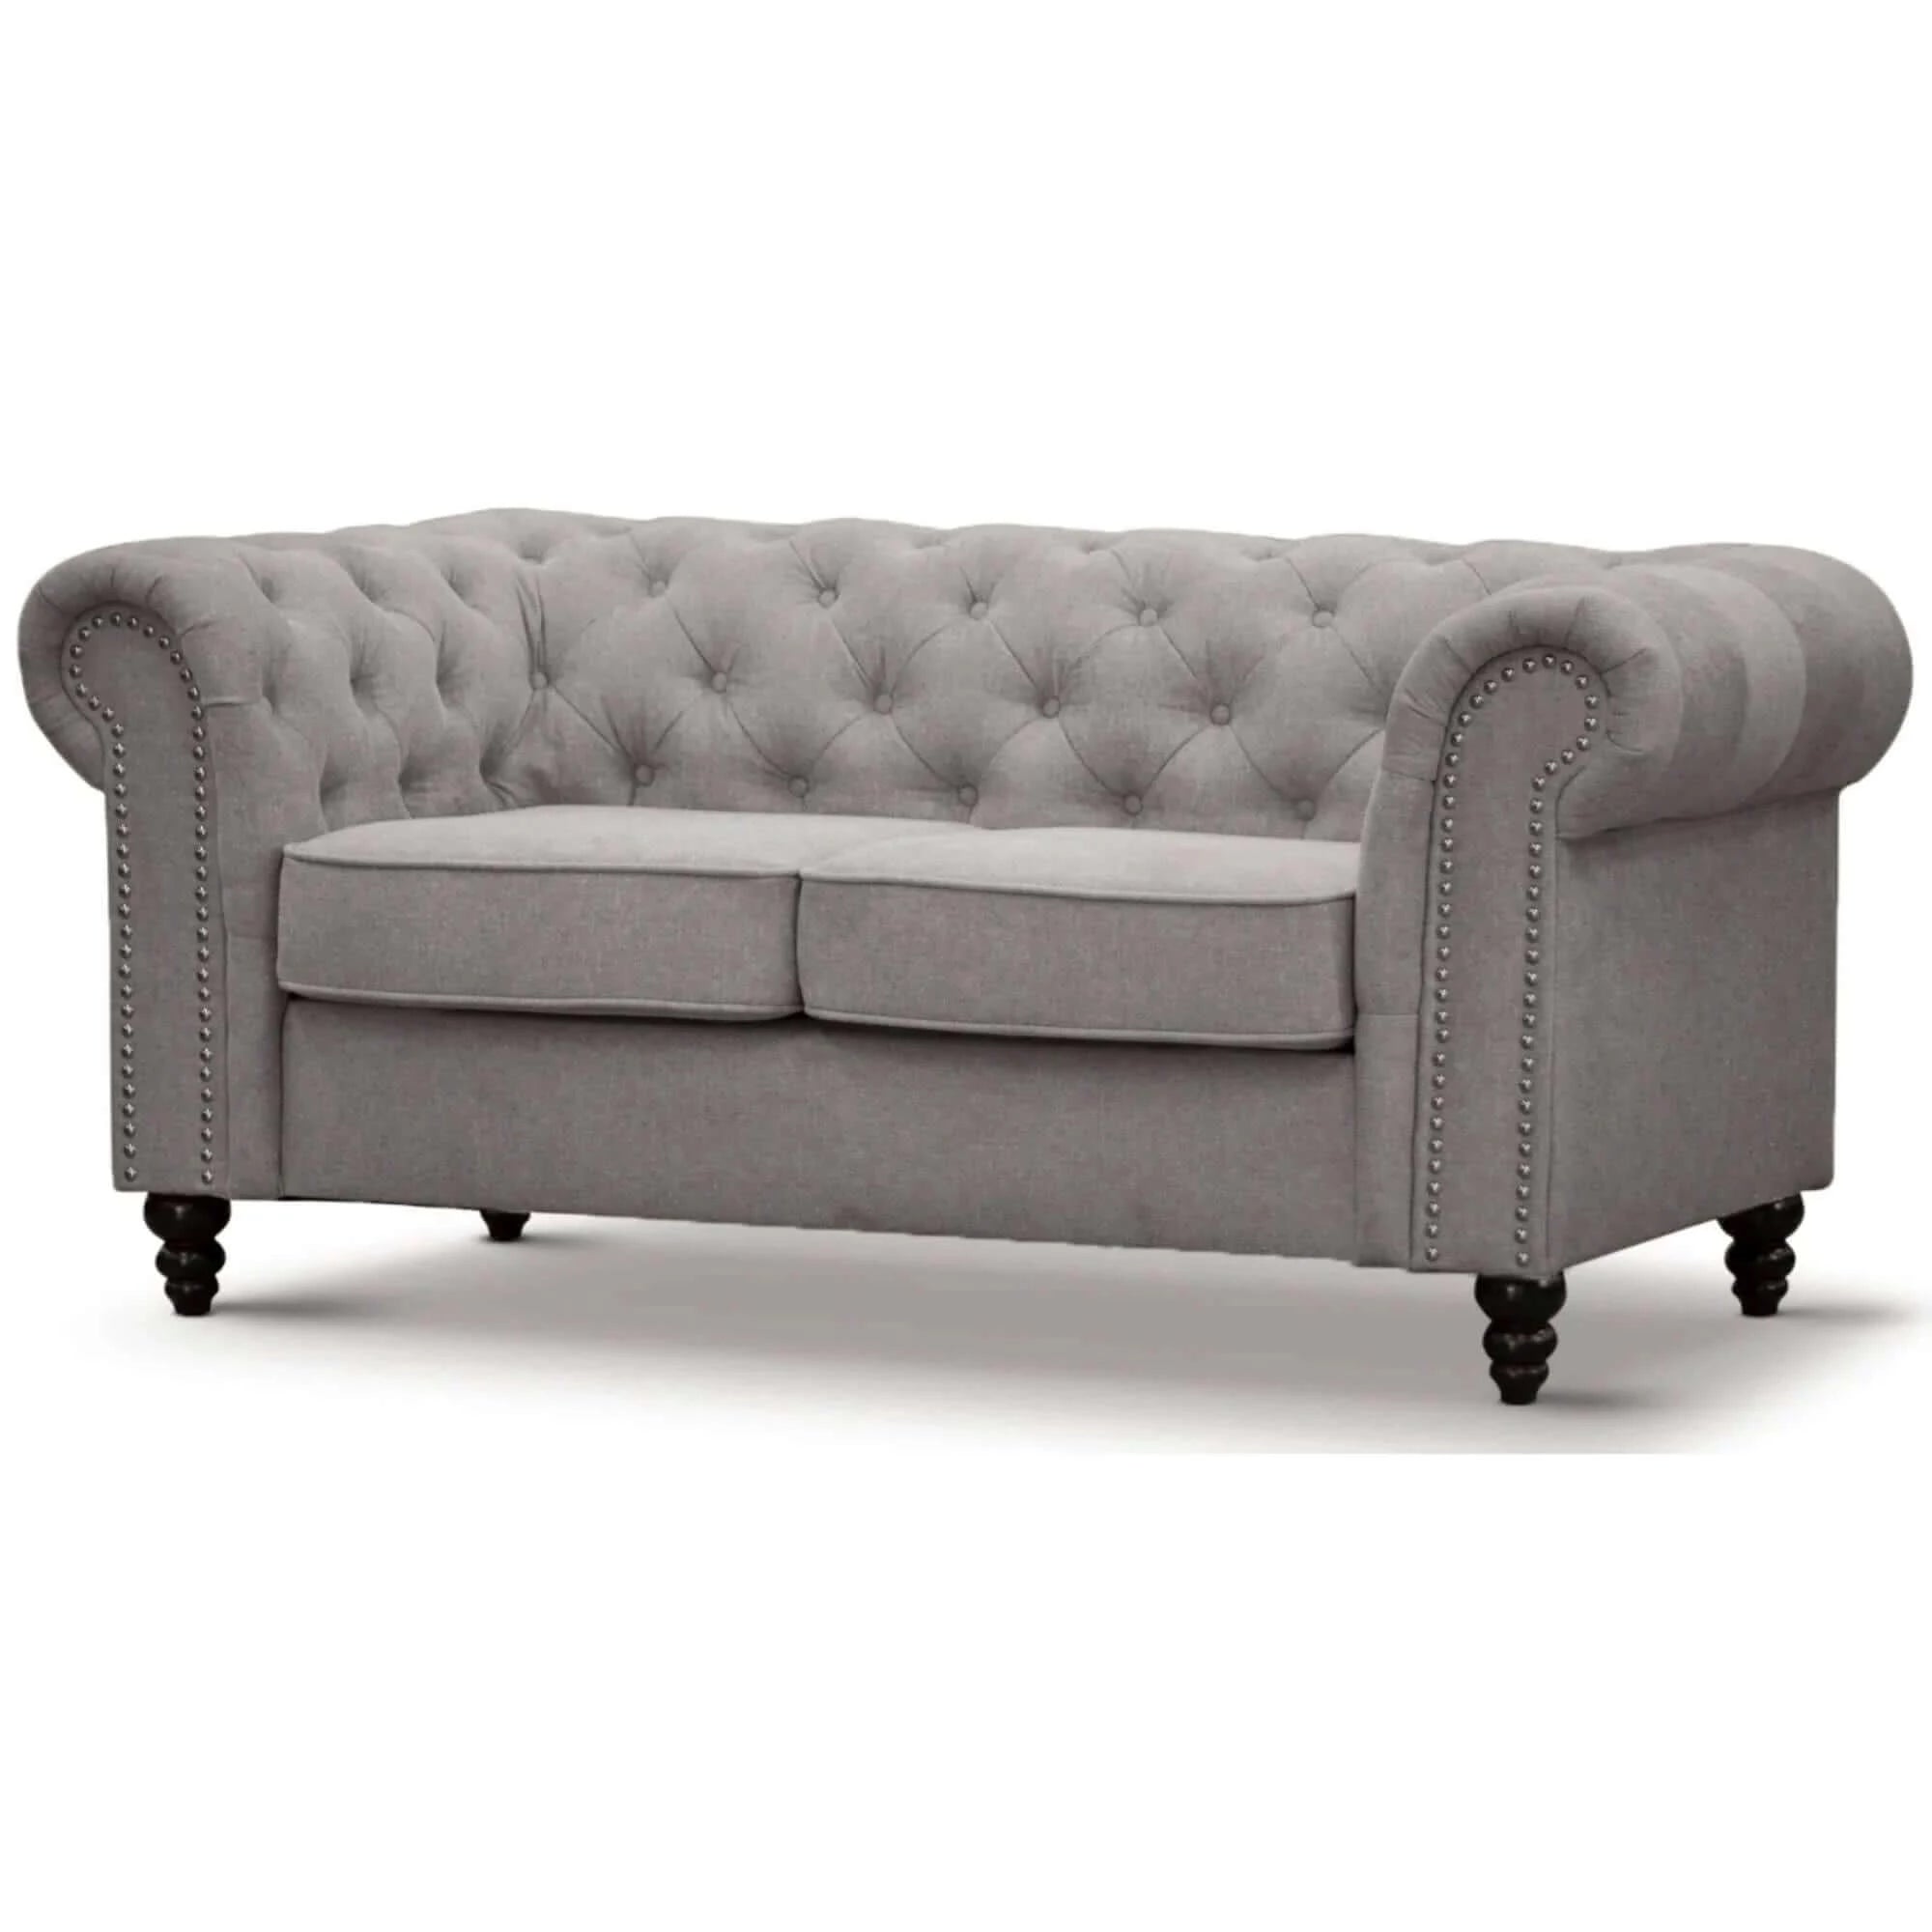 Buy Mellowly 2 Seater Sofa Fabric Uplholstered Chesterfield Lounge Couch – Upinteriors-Upinteriors